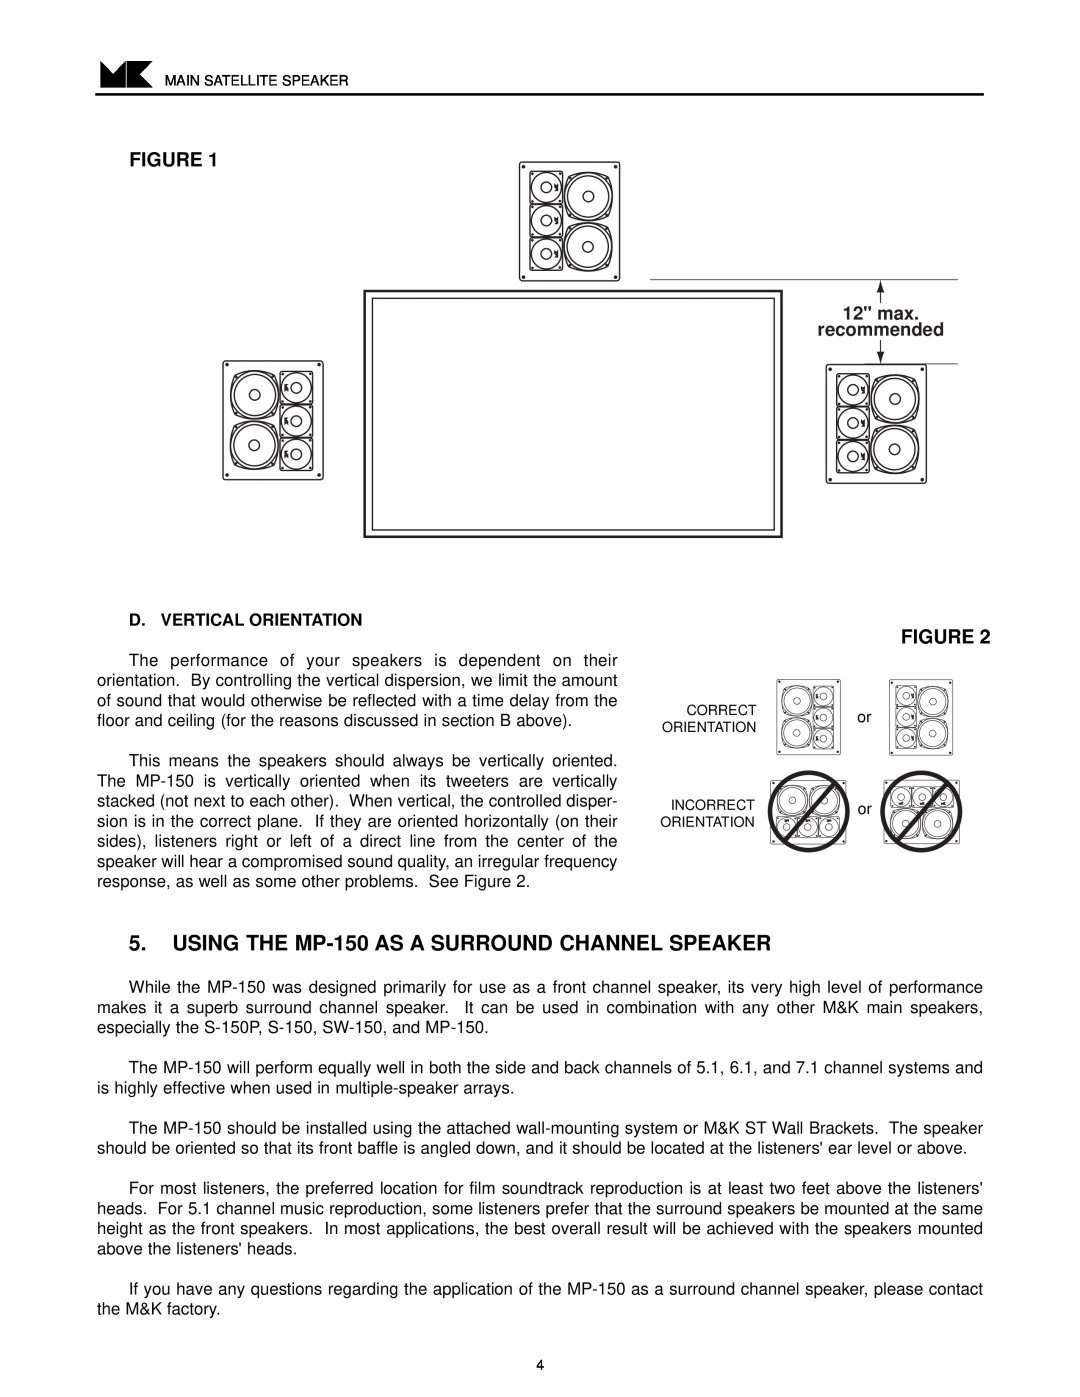 MK Sound operation manual USING THE MP-150AS A SURROUND CHANNEL SPEAKER, max recommended, D. Vertical Orientation 